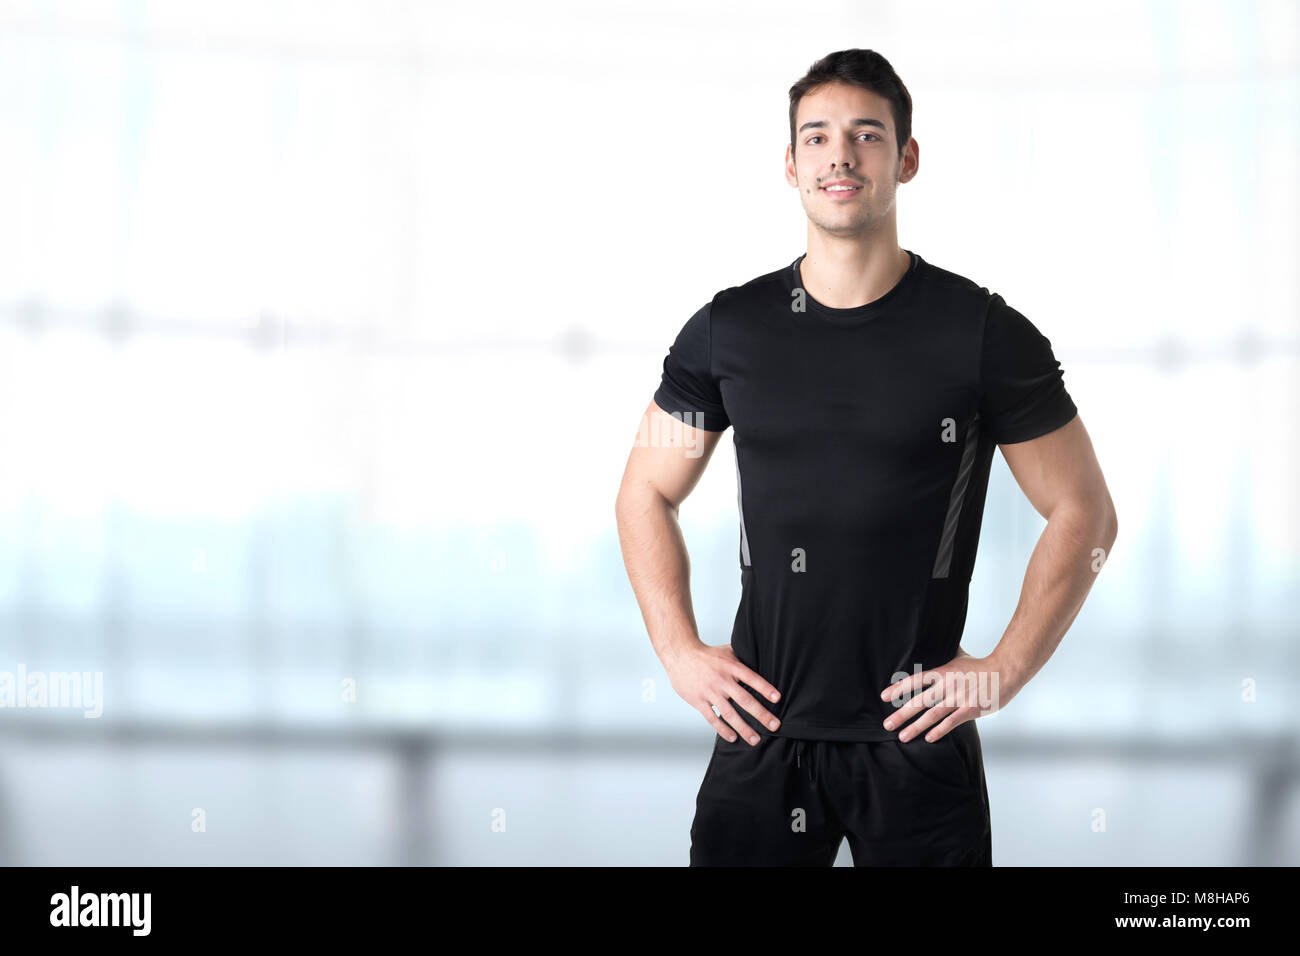 Personal Trainer With Hands on Waist in a Gym Stock Photo